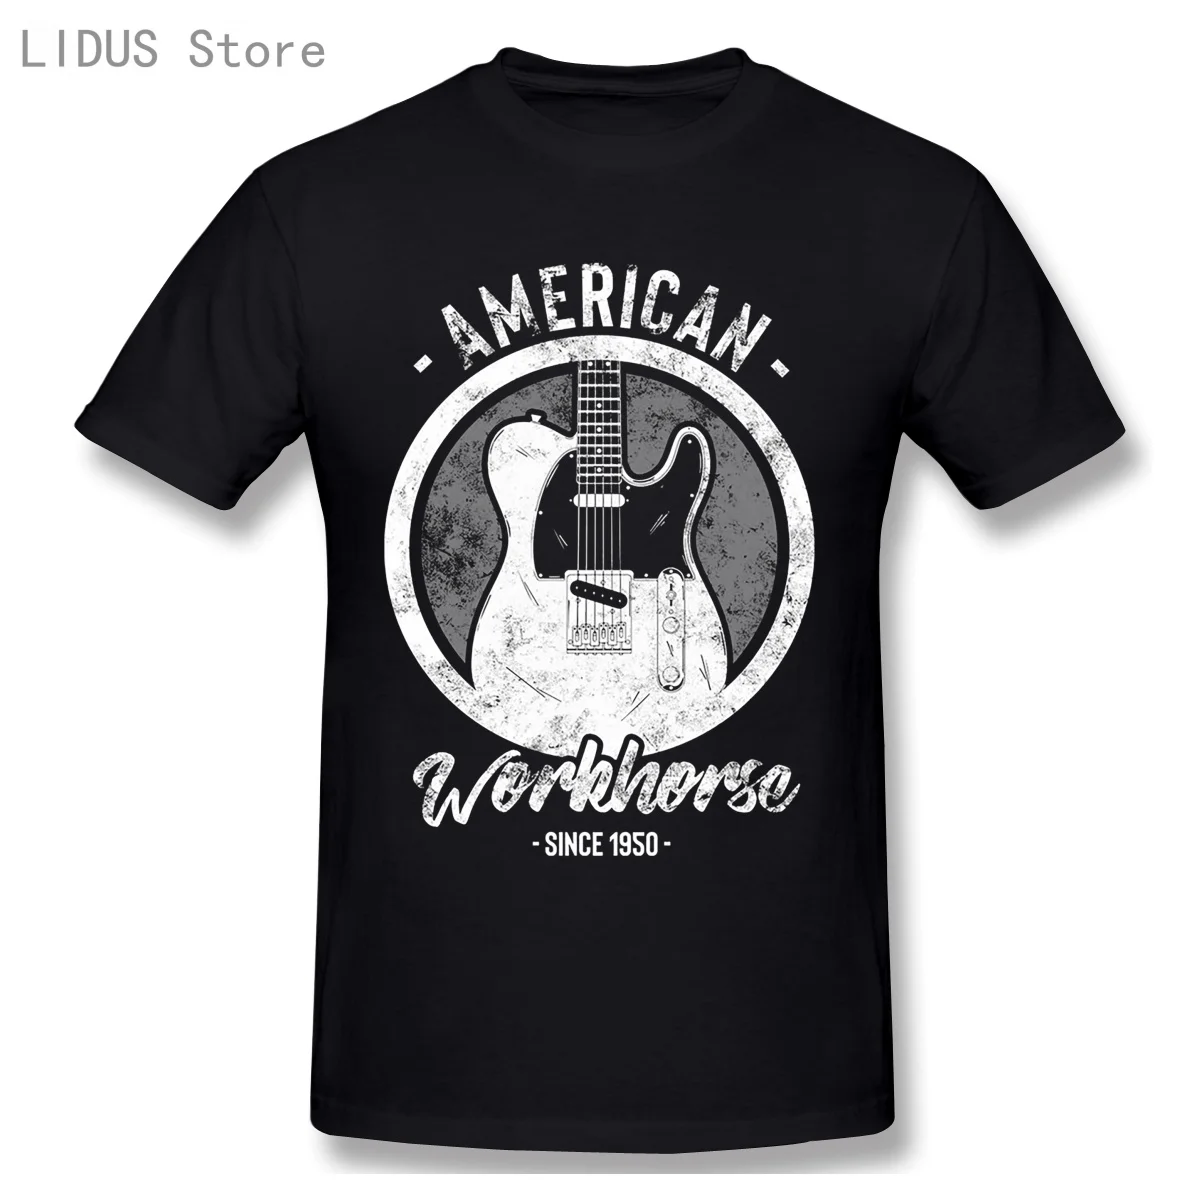 

American Work Horse Since 1950 New Mens TShirts Guitar T Shirts Funny Humor Stylish Top Tee Loose T-Shirts